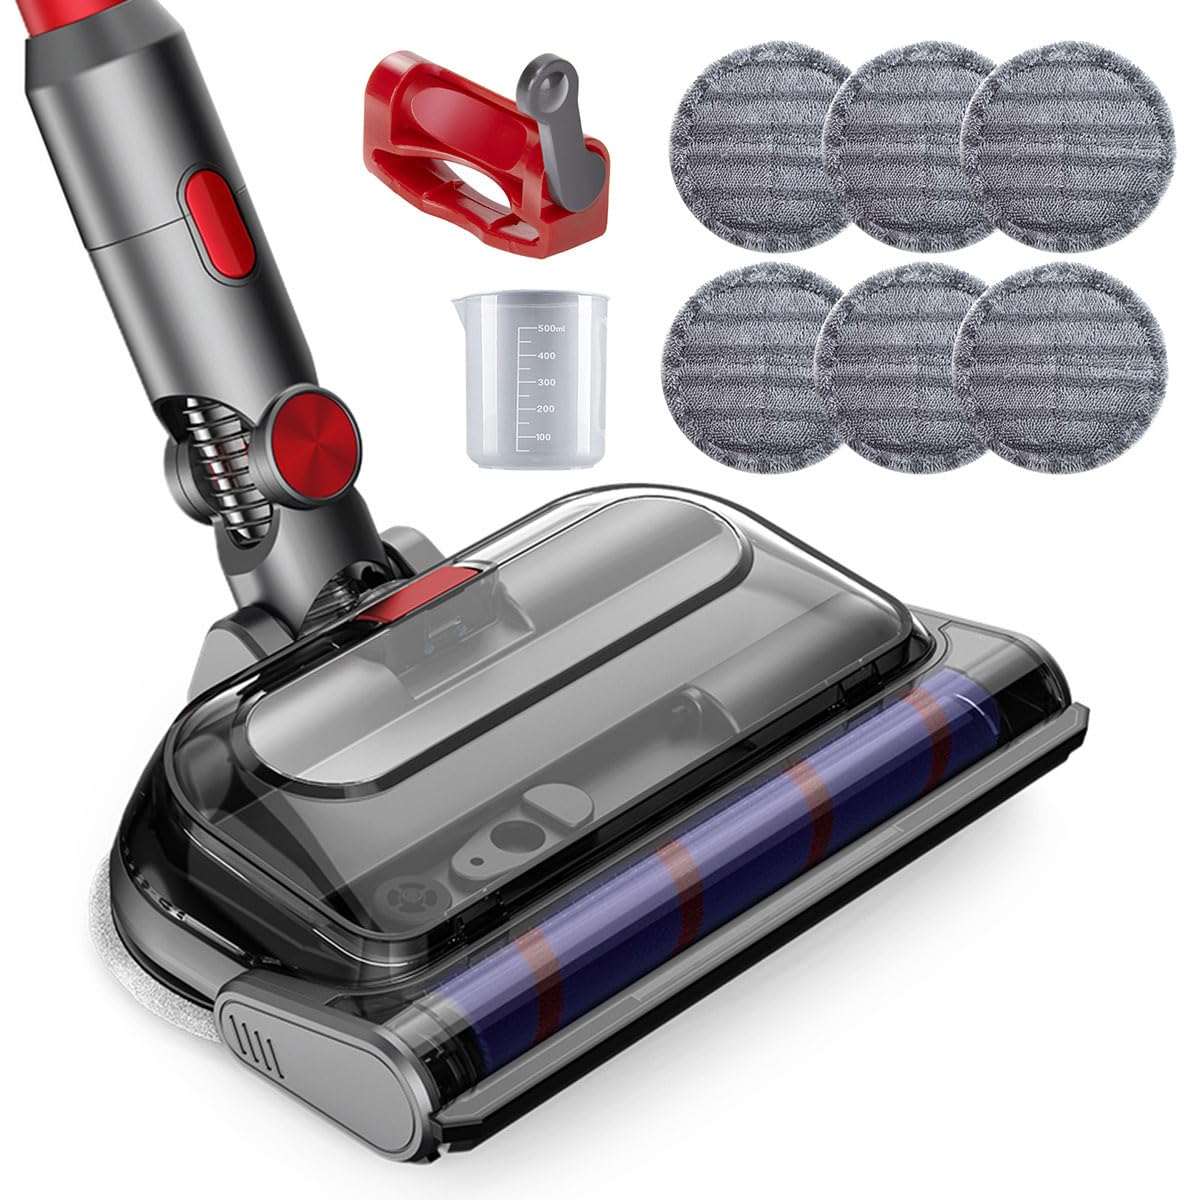 Electric mop Head for Dyson v7 v8 v10 v11 v15Vacuum Cleaner,Wet vacuum cleaner for furniture with detachable water tank and six reusable mop pads.